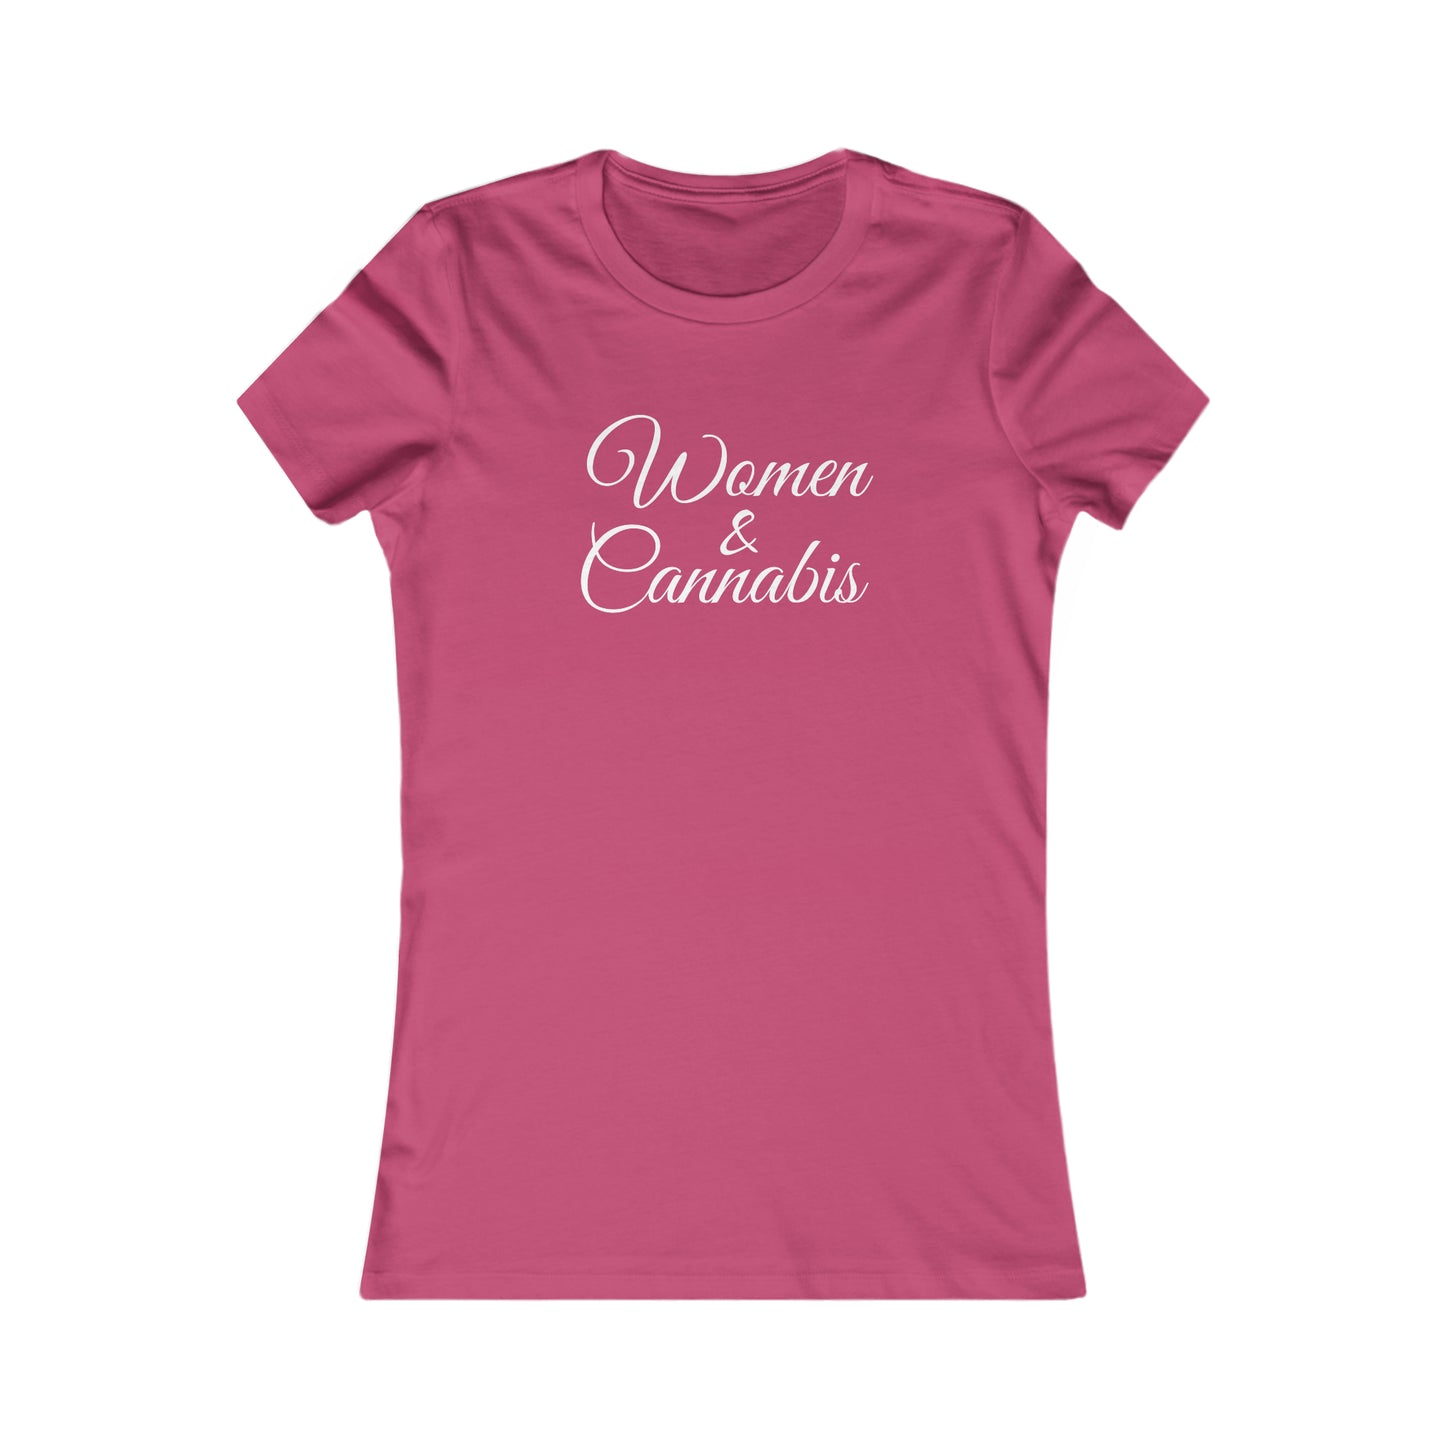 Women & Cannabis Favorite Tee with White Font